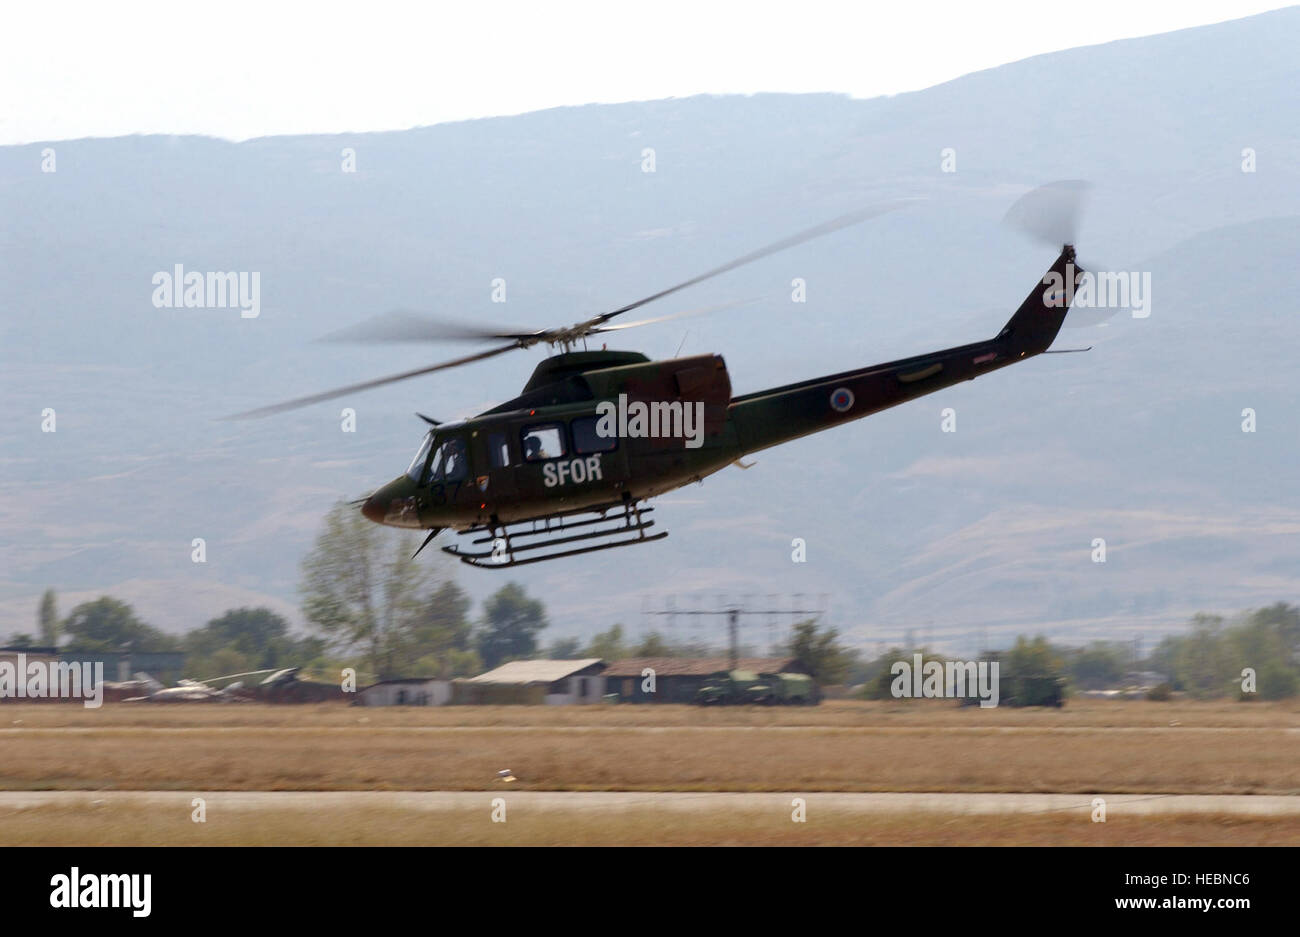 This UH-1N Iroquois or Huey helicopter from Slovenia, flies over Krumovo Air Base (AB) in Bulgaria (BG), securing the airfield as part of exercise Cooperative Key 2003. Exercise Cooperative Key is designed to promote procedural dialogue between North Atlantic Treaty Organization (NATO) and partner nations. Stock Photo